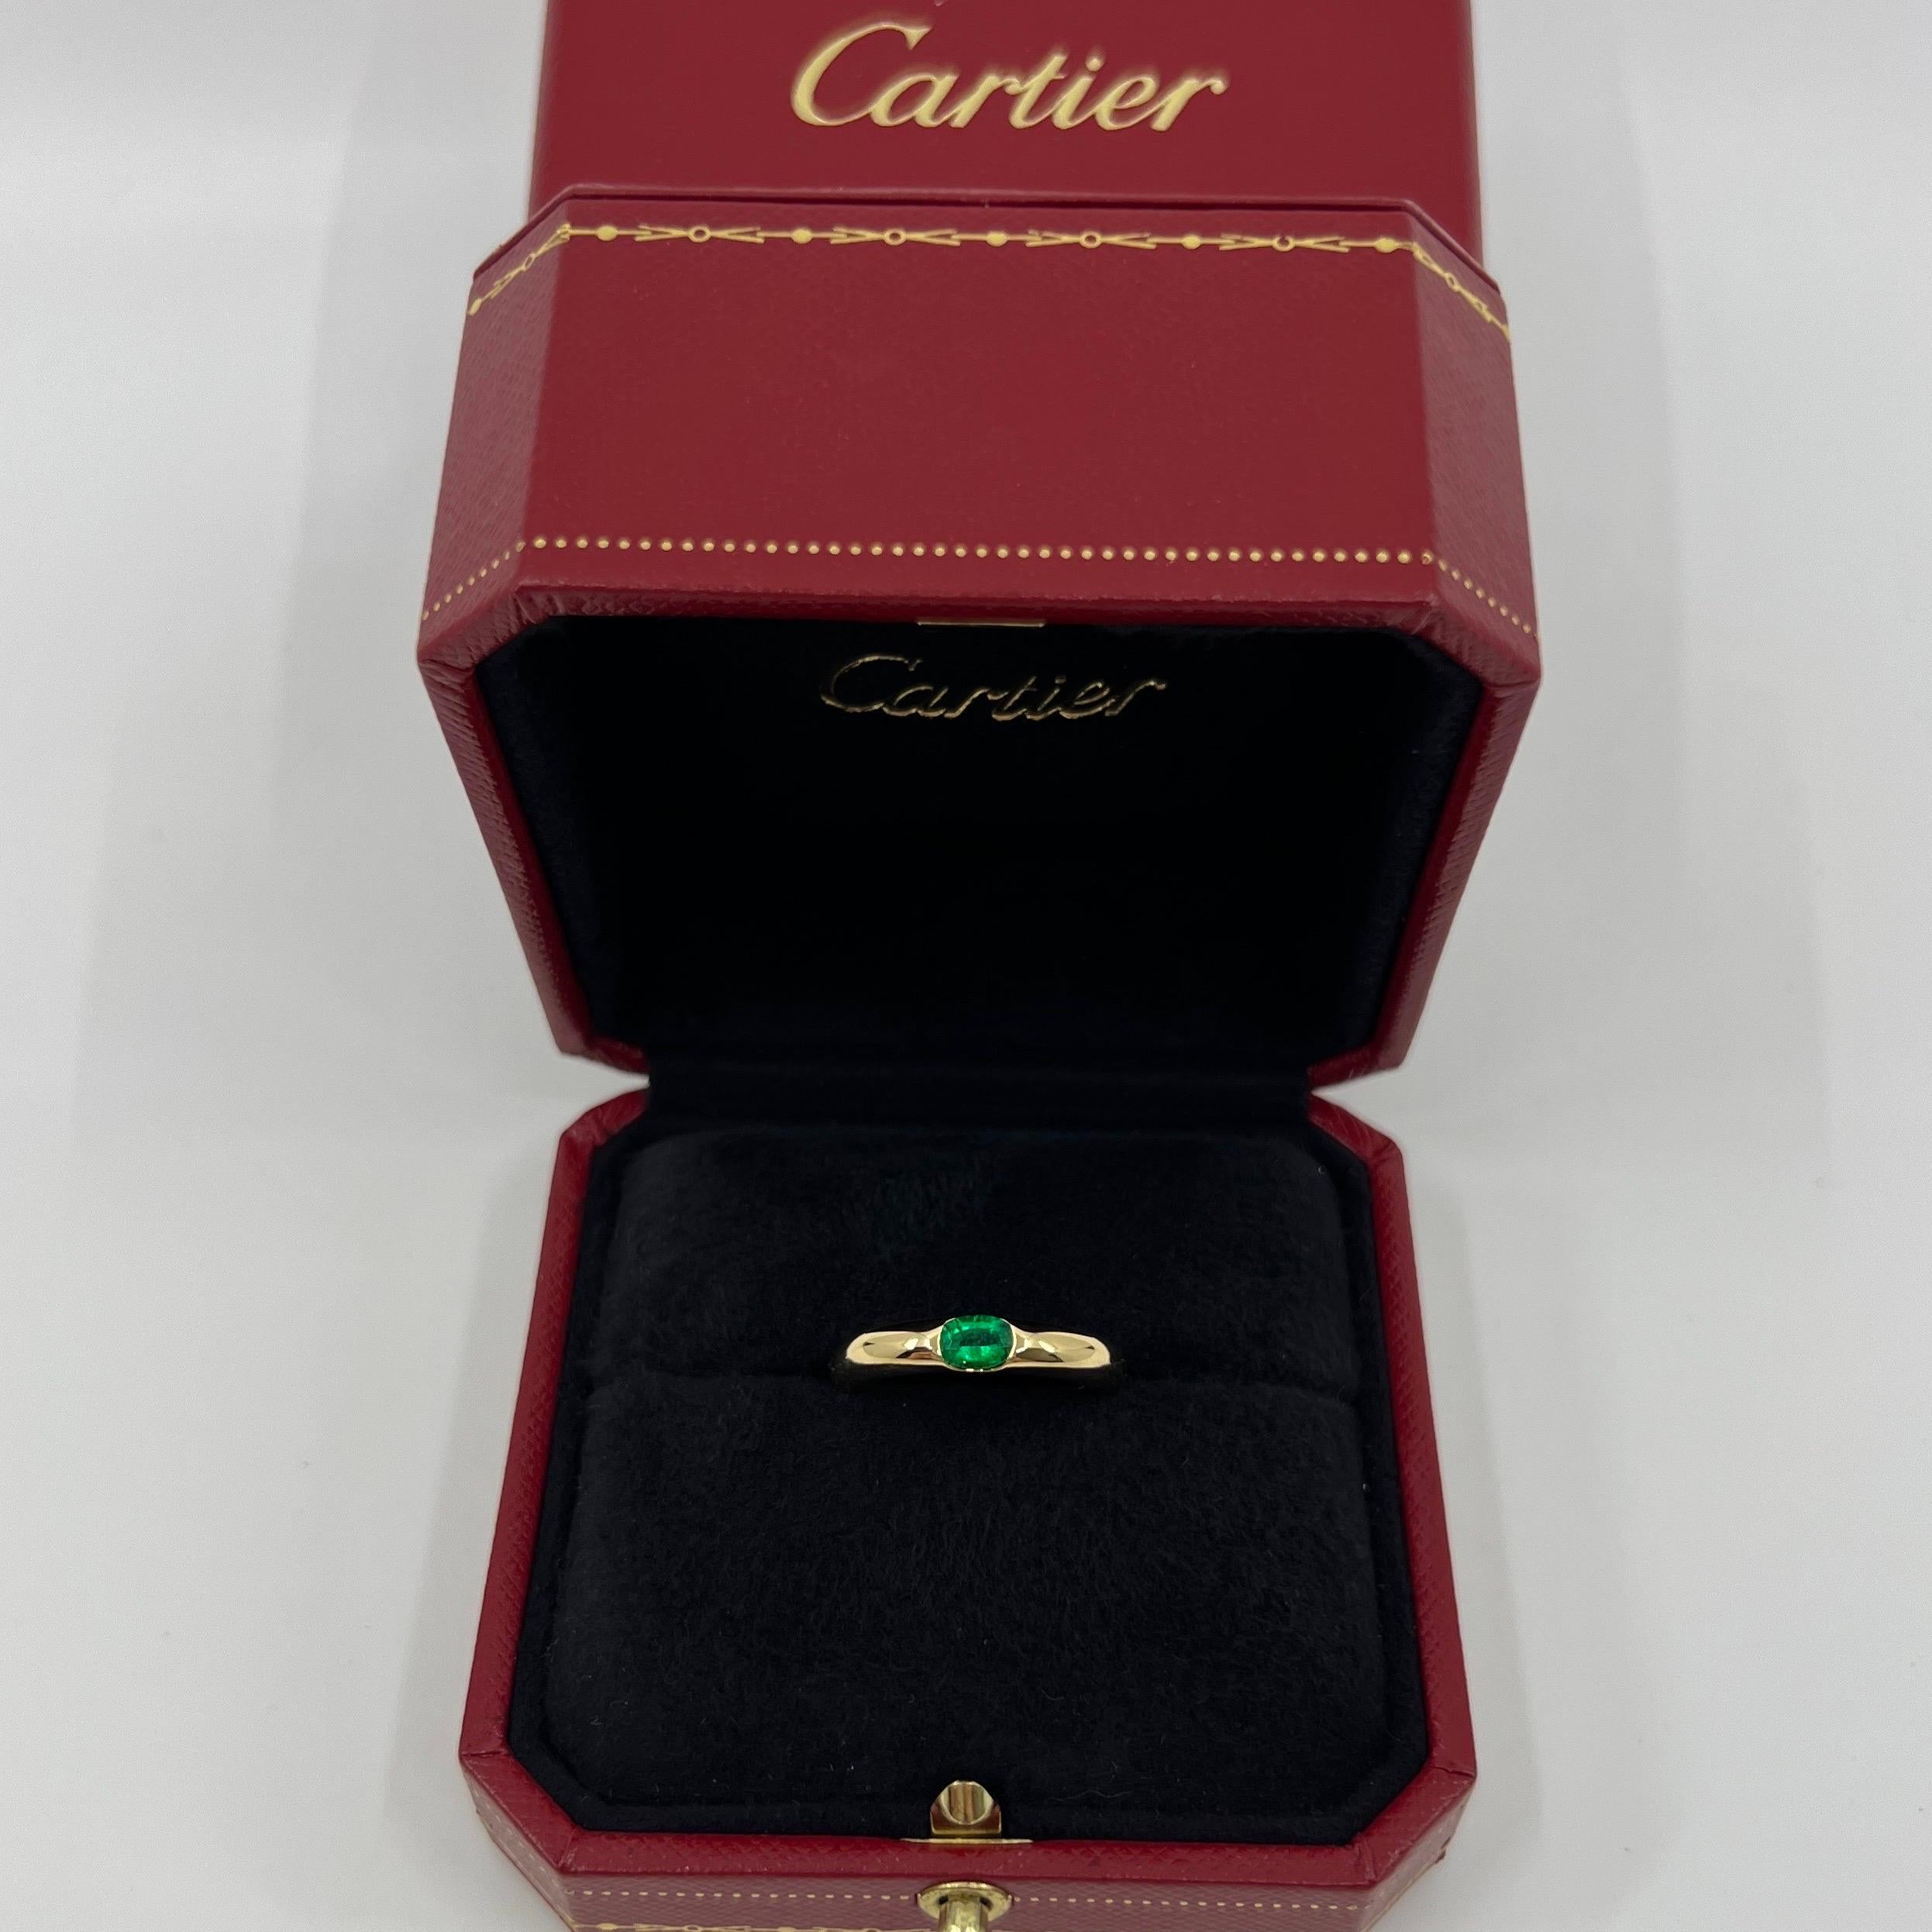 Vintage Cartier Vivid Green Emerald 18k Yellow Gold Solitaire Ring.

Stunning yellow gold Cartier ring set with a fine vivid green emerald. Fine jewellery houses like Cartier only use the finest of gemstones and this emerald is no exception.

An